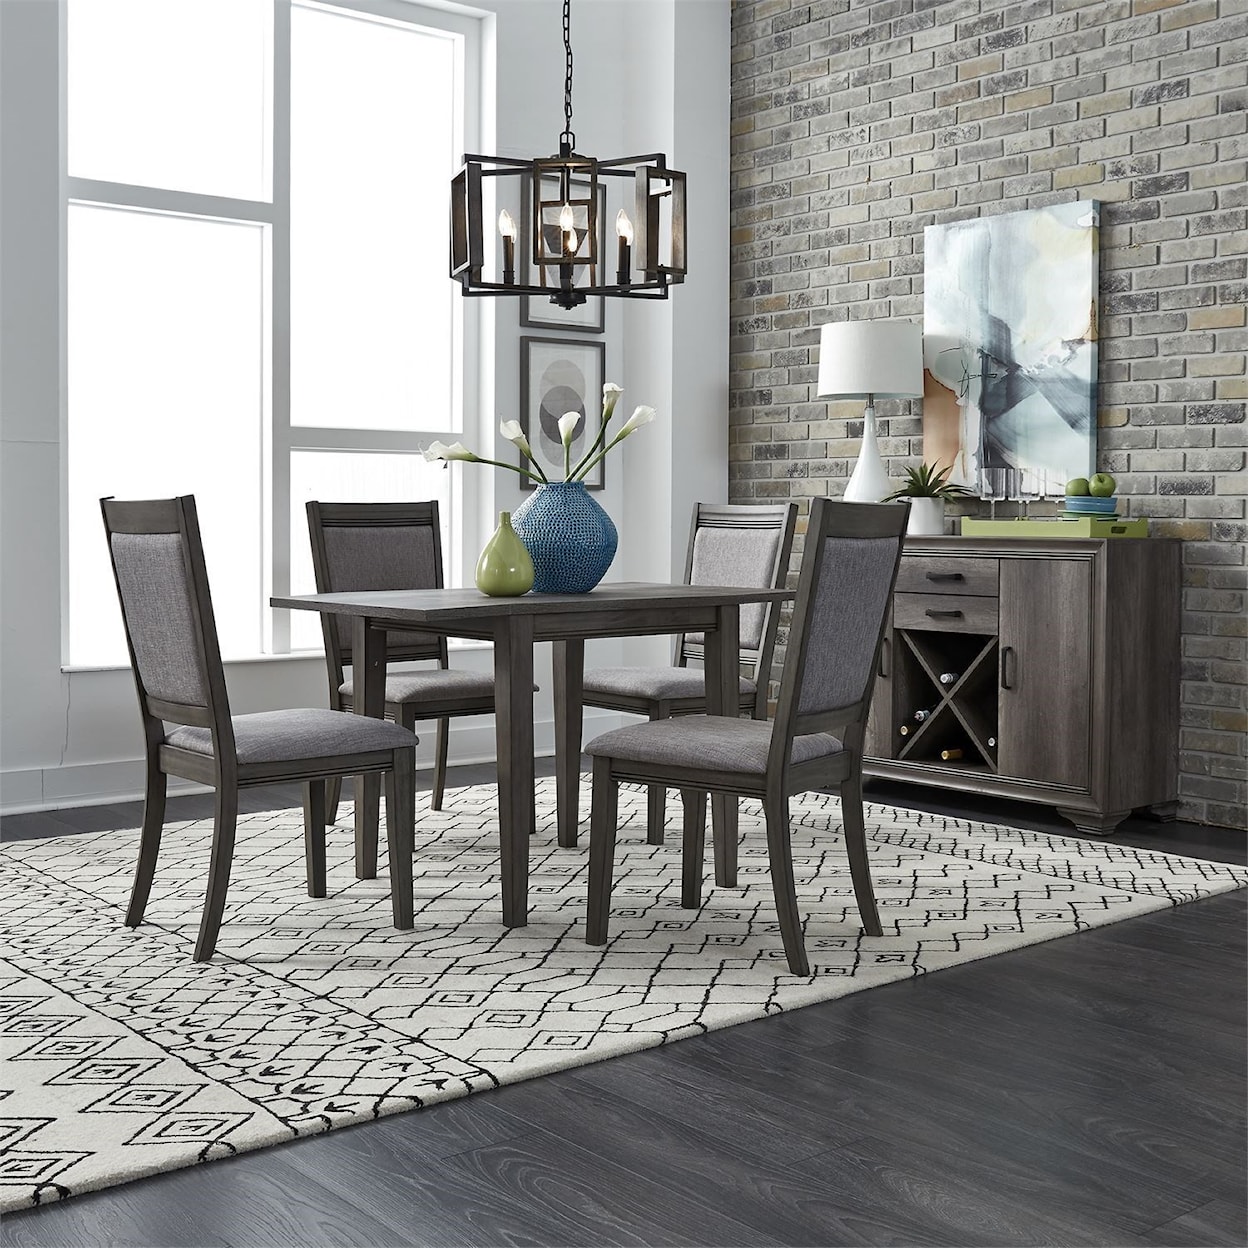 Liberty Furniture Tanners Creek Dining Room Group